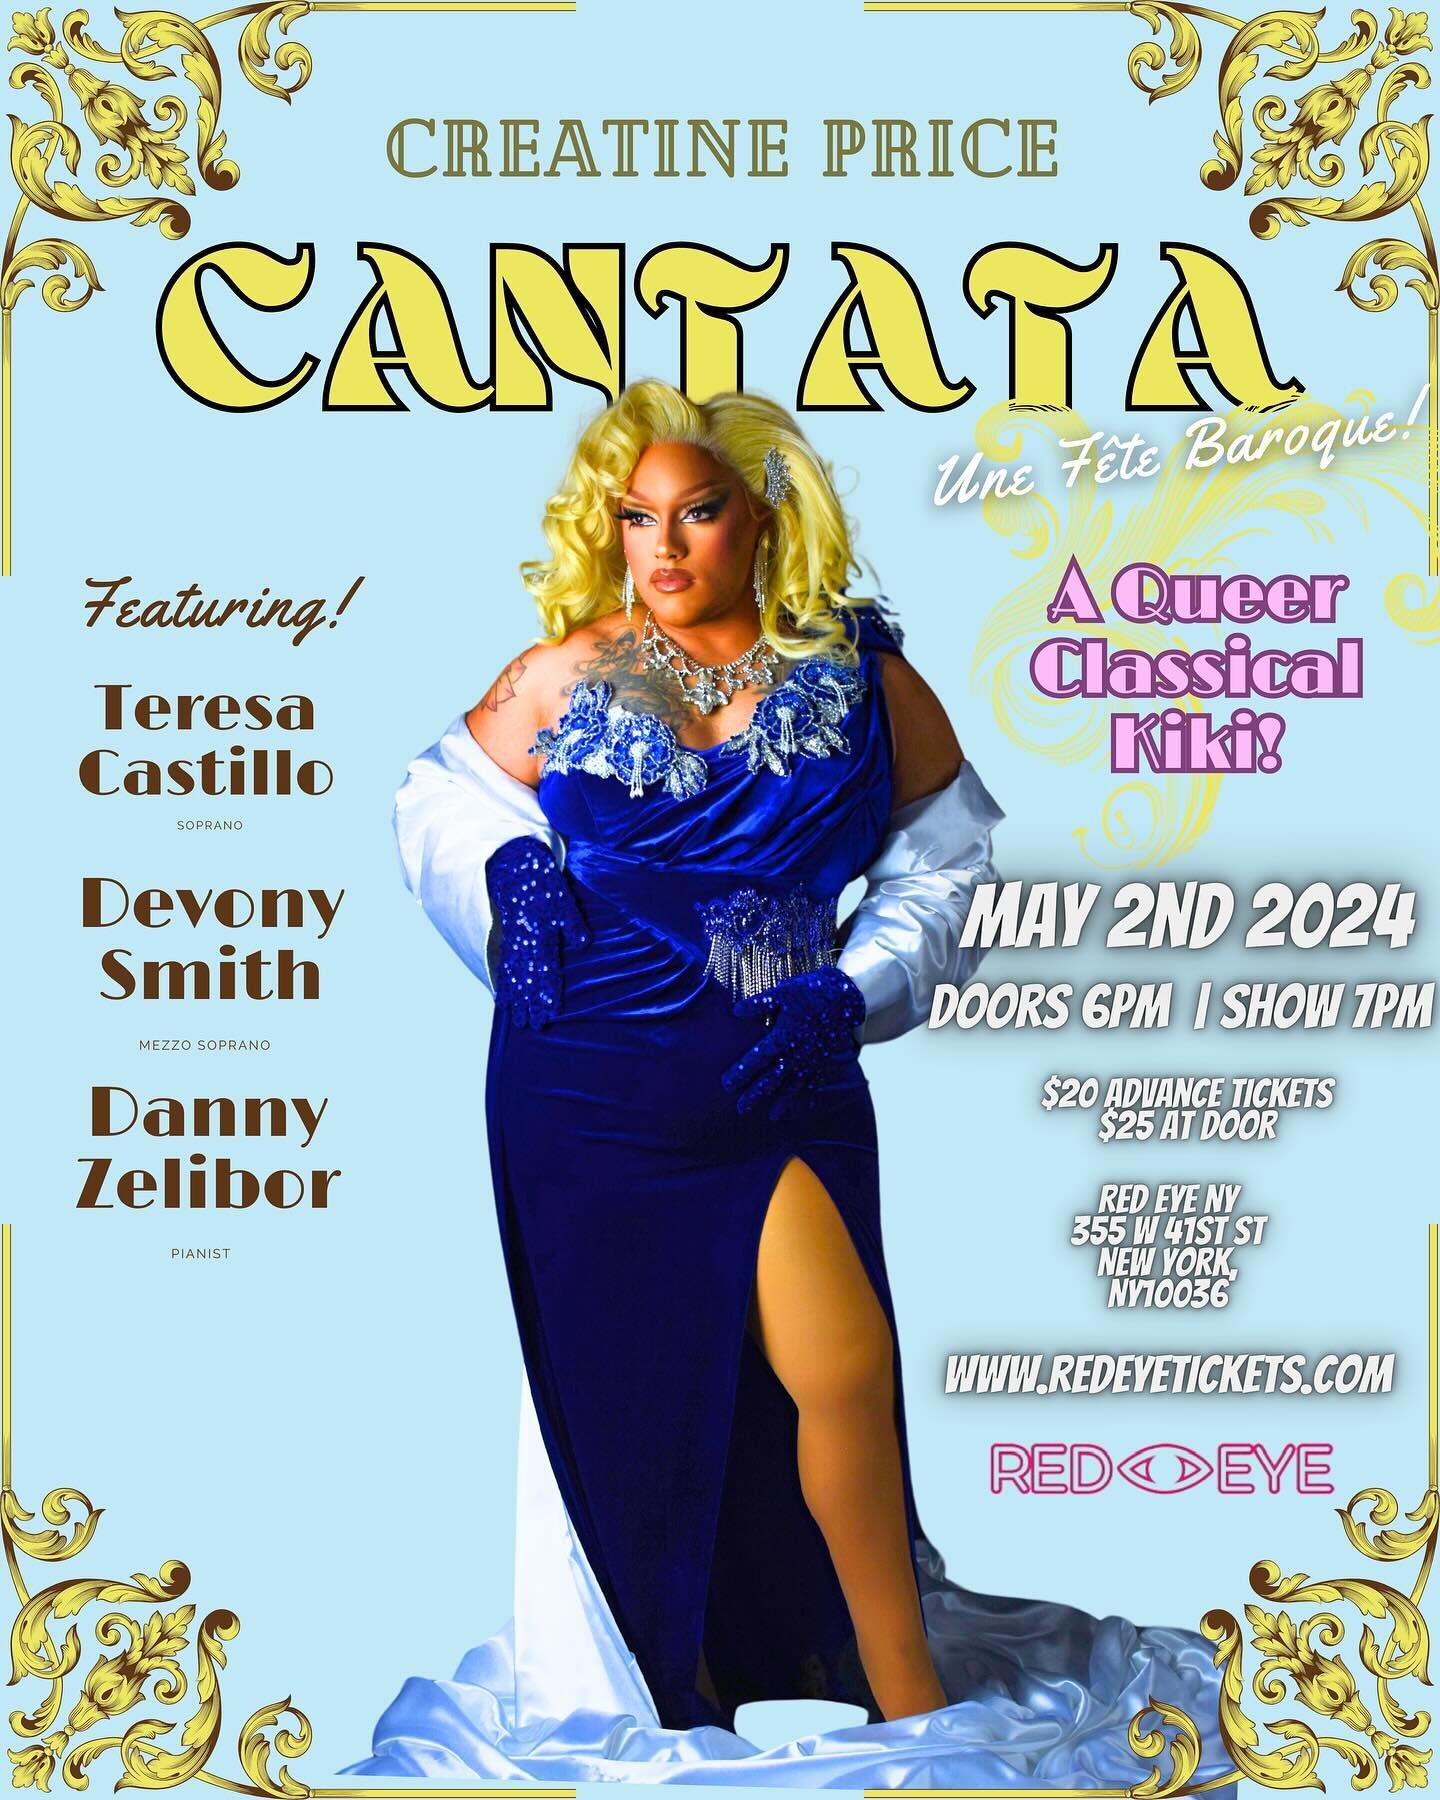 ATTENTION ATTENTION!!! FINALLY! I am SO EXCITED to be able to make my BIG ANNOUNCEMENT to you all ! I have my first very own monthly show in Hells Kitchen @redeye_ny ! Introducing CANTATA !! - Creatine Price&rsquo;s &ldquo;Cantata!&rdquo; is a monthl